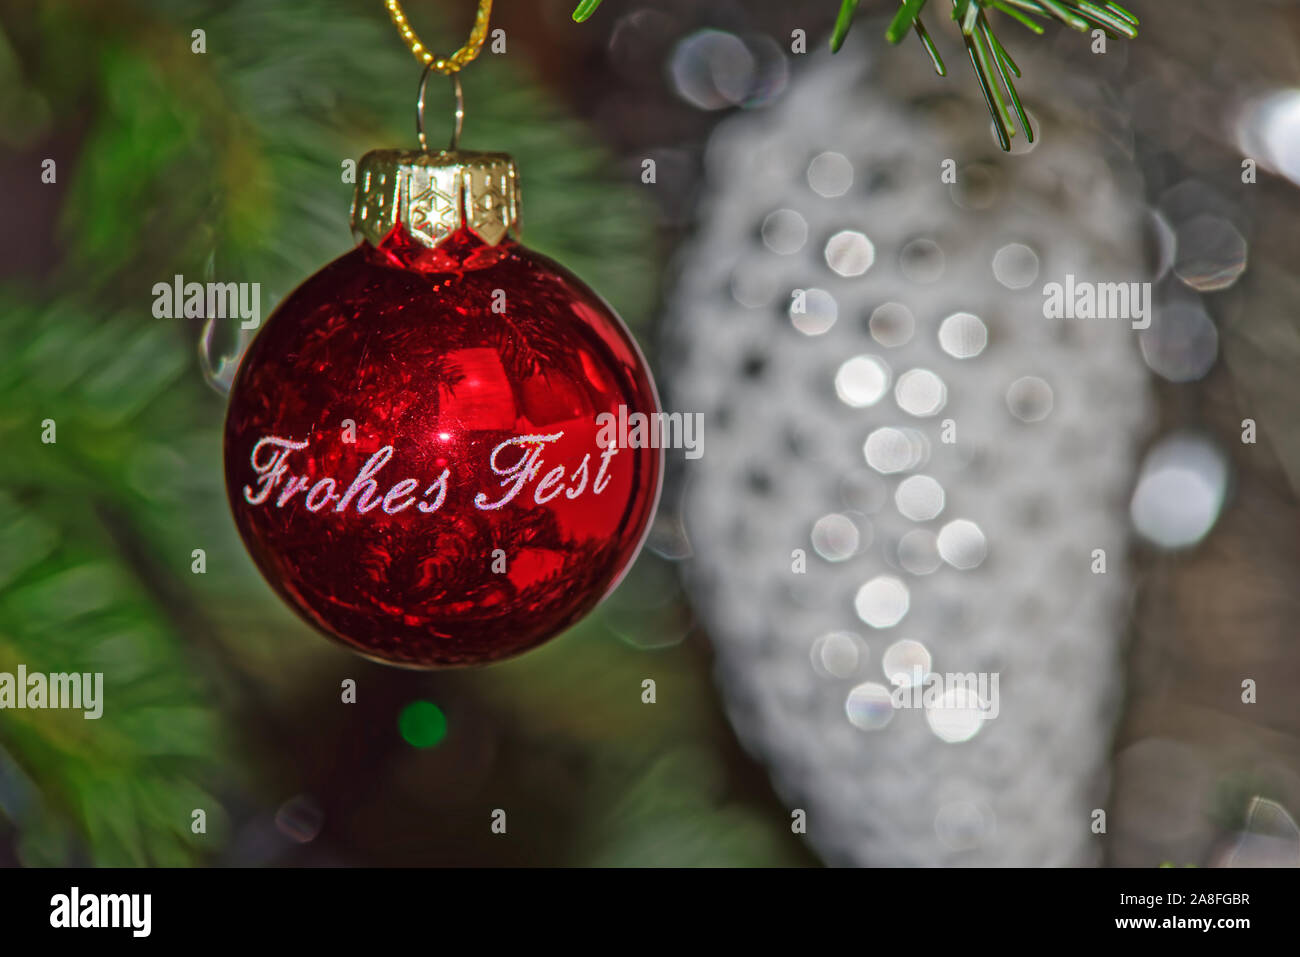 Red Christmas ball with Happy Holiday text in German against blurred Christmas decoration Stock Photo